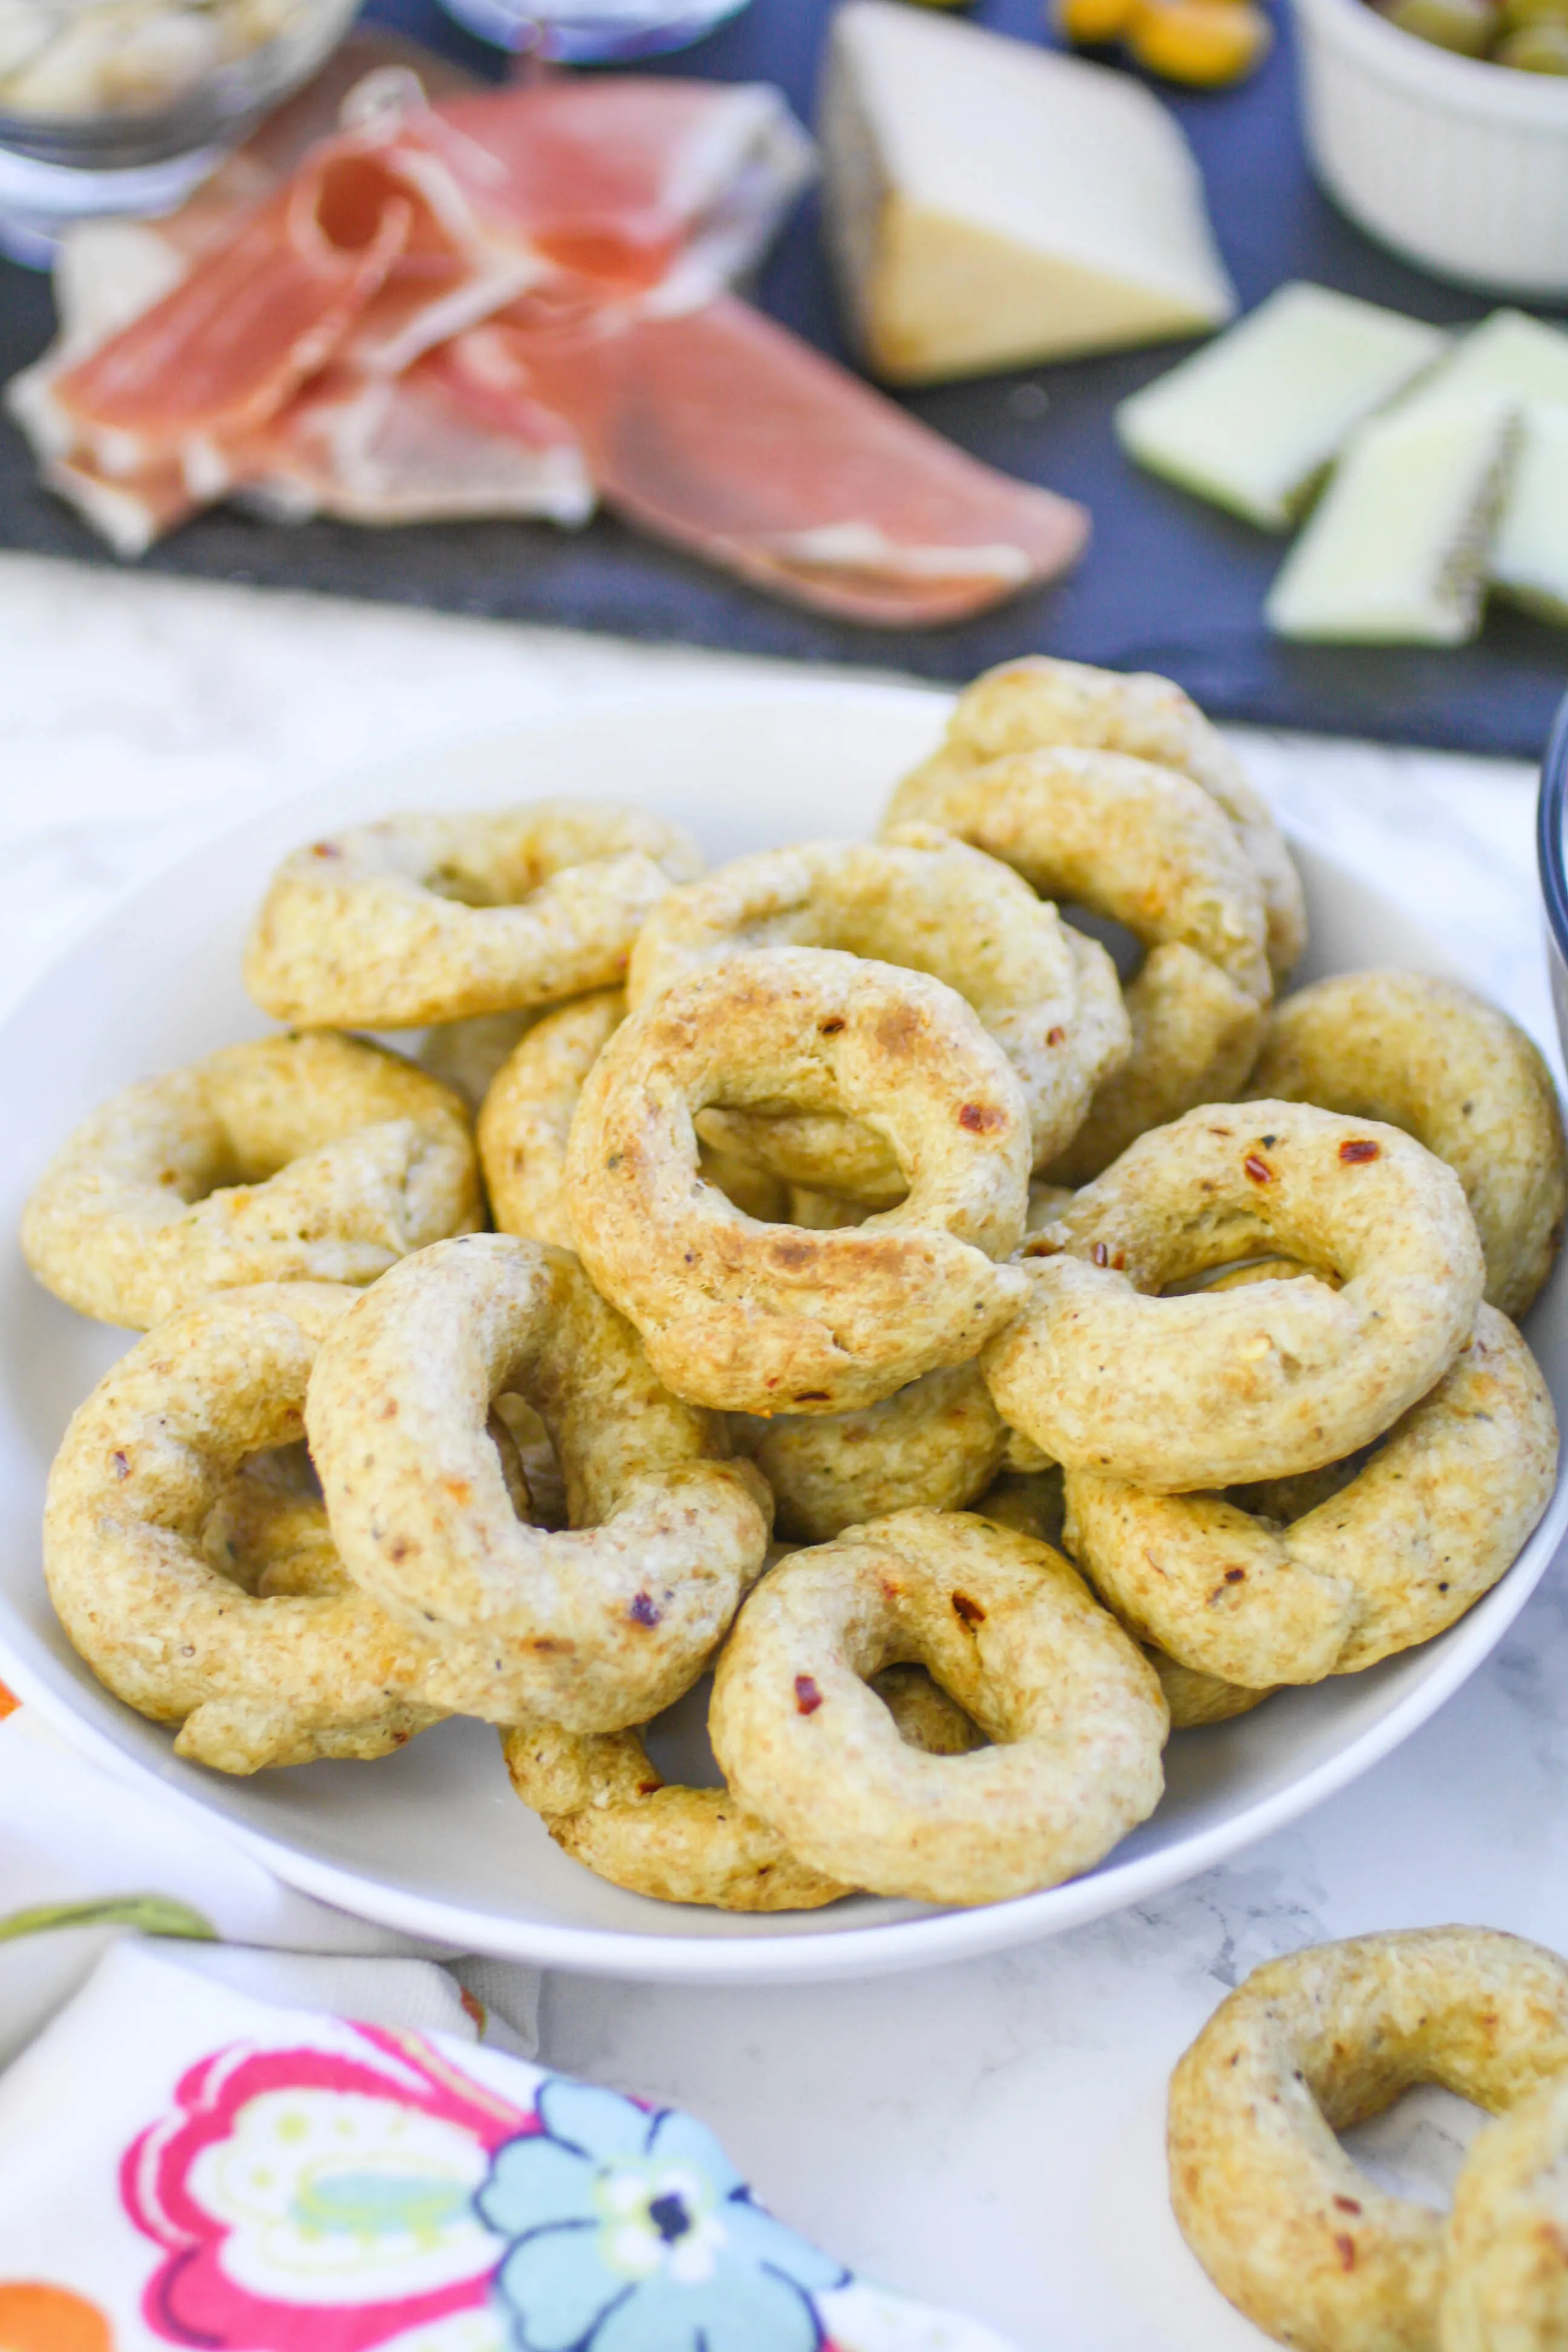 Red Pepper Italian Taralli (Breadstick Rings) make great snacks! Serve Red Pepper Italian Taralli (Breadstick Rings) with salad, antipasto, or on their own! You'll enjoy these Red Pepper Italian Taralli (Breadstick Rings) snacks.